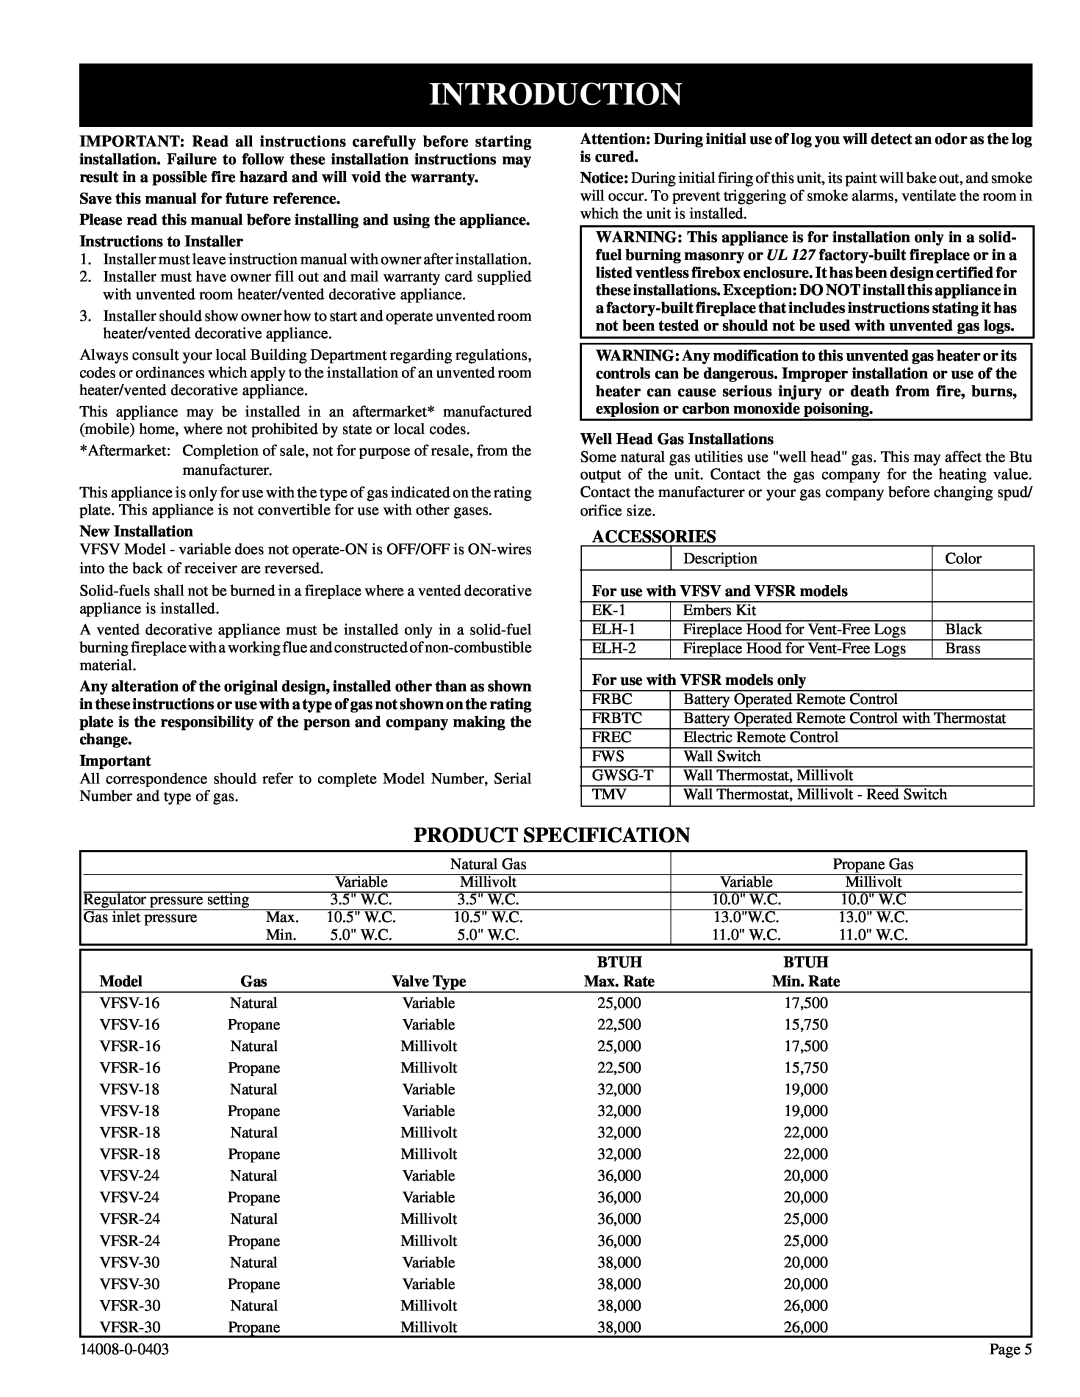 Empire Comfort Systems VFSR-16-3 Introduction, Save this manual for future reference, New Installation, Btuh, Model 